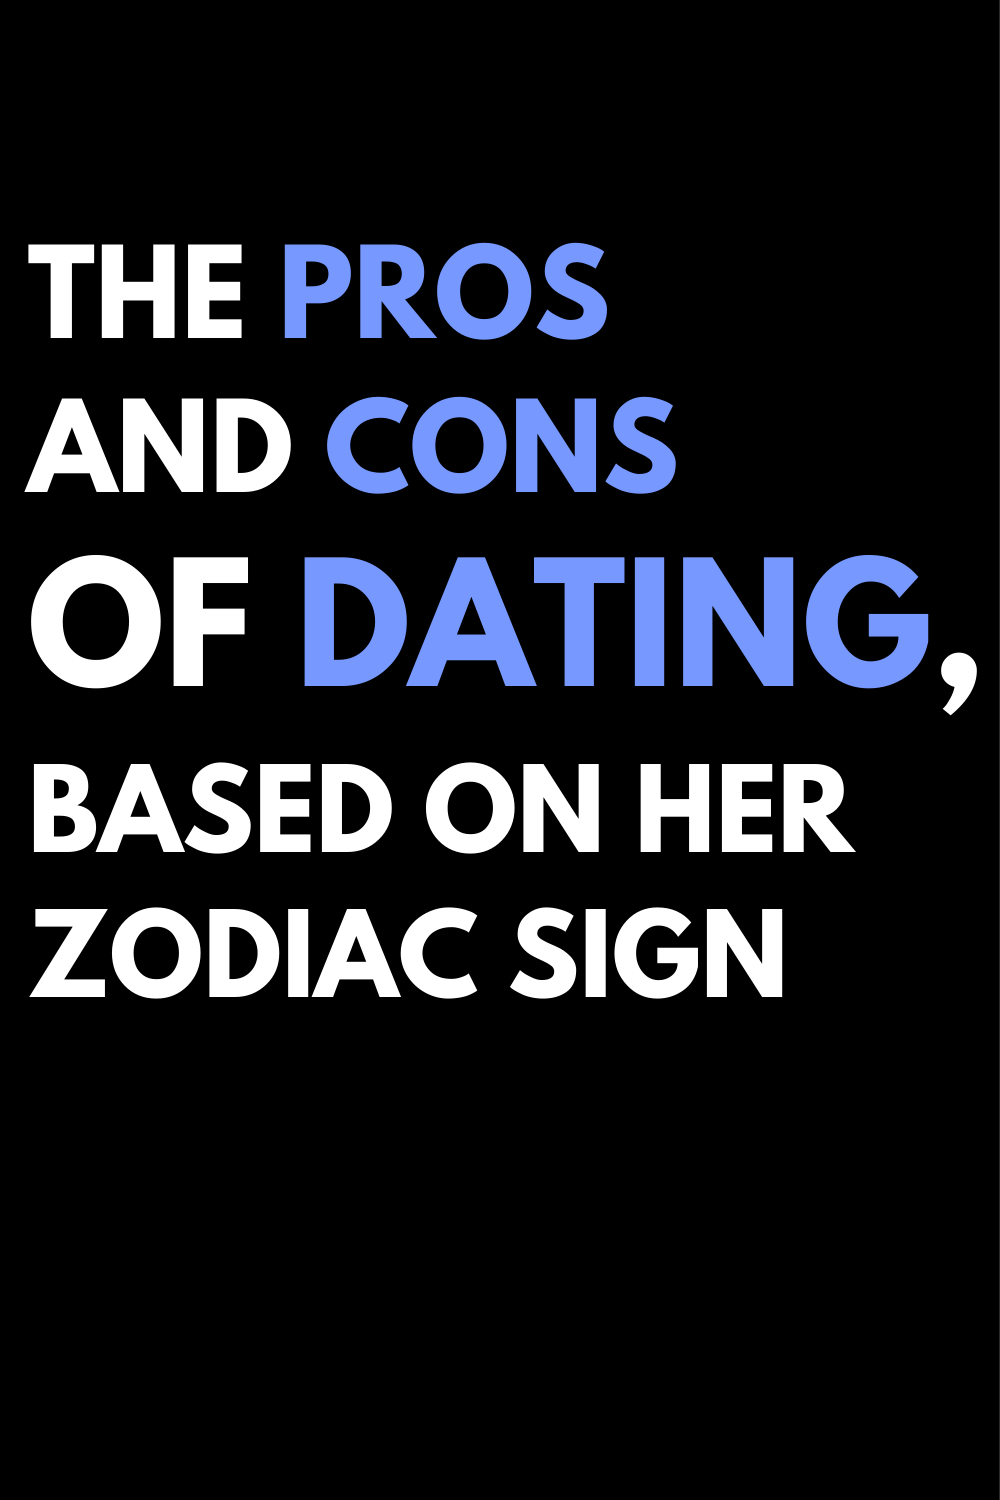 The Pros And Cons of Dating, Based On Her Zodiac Sign